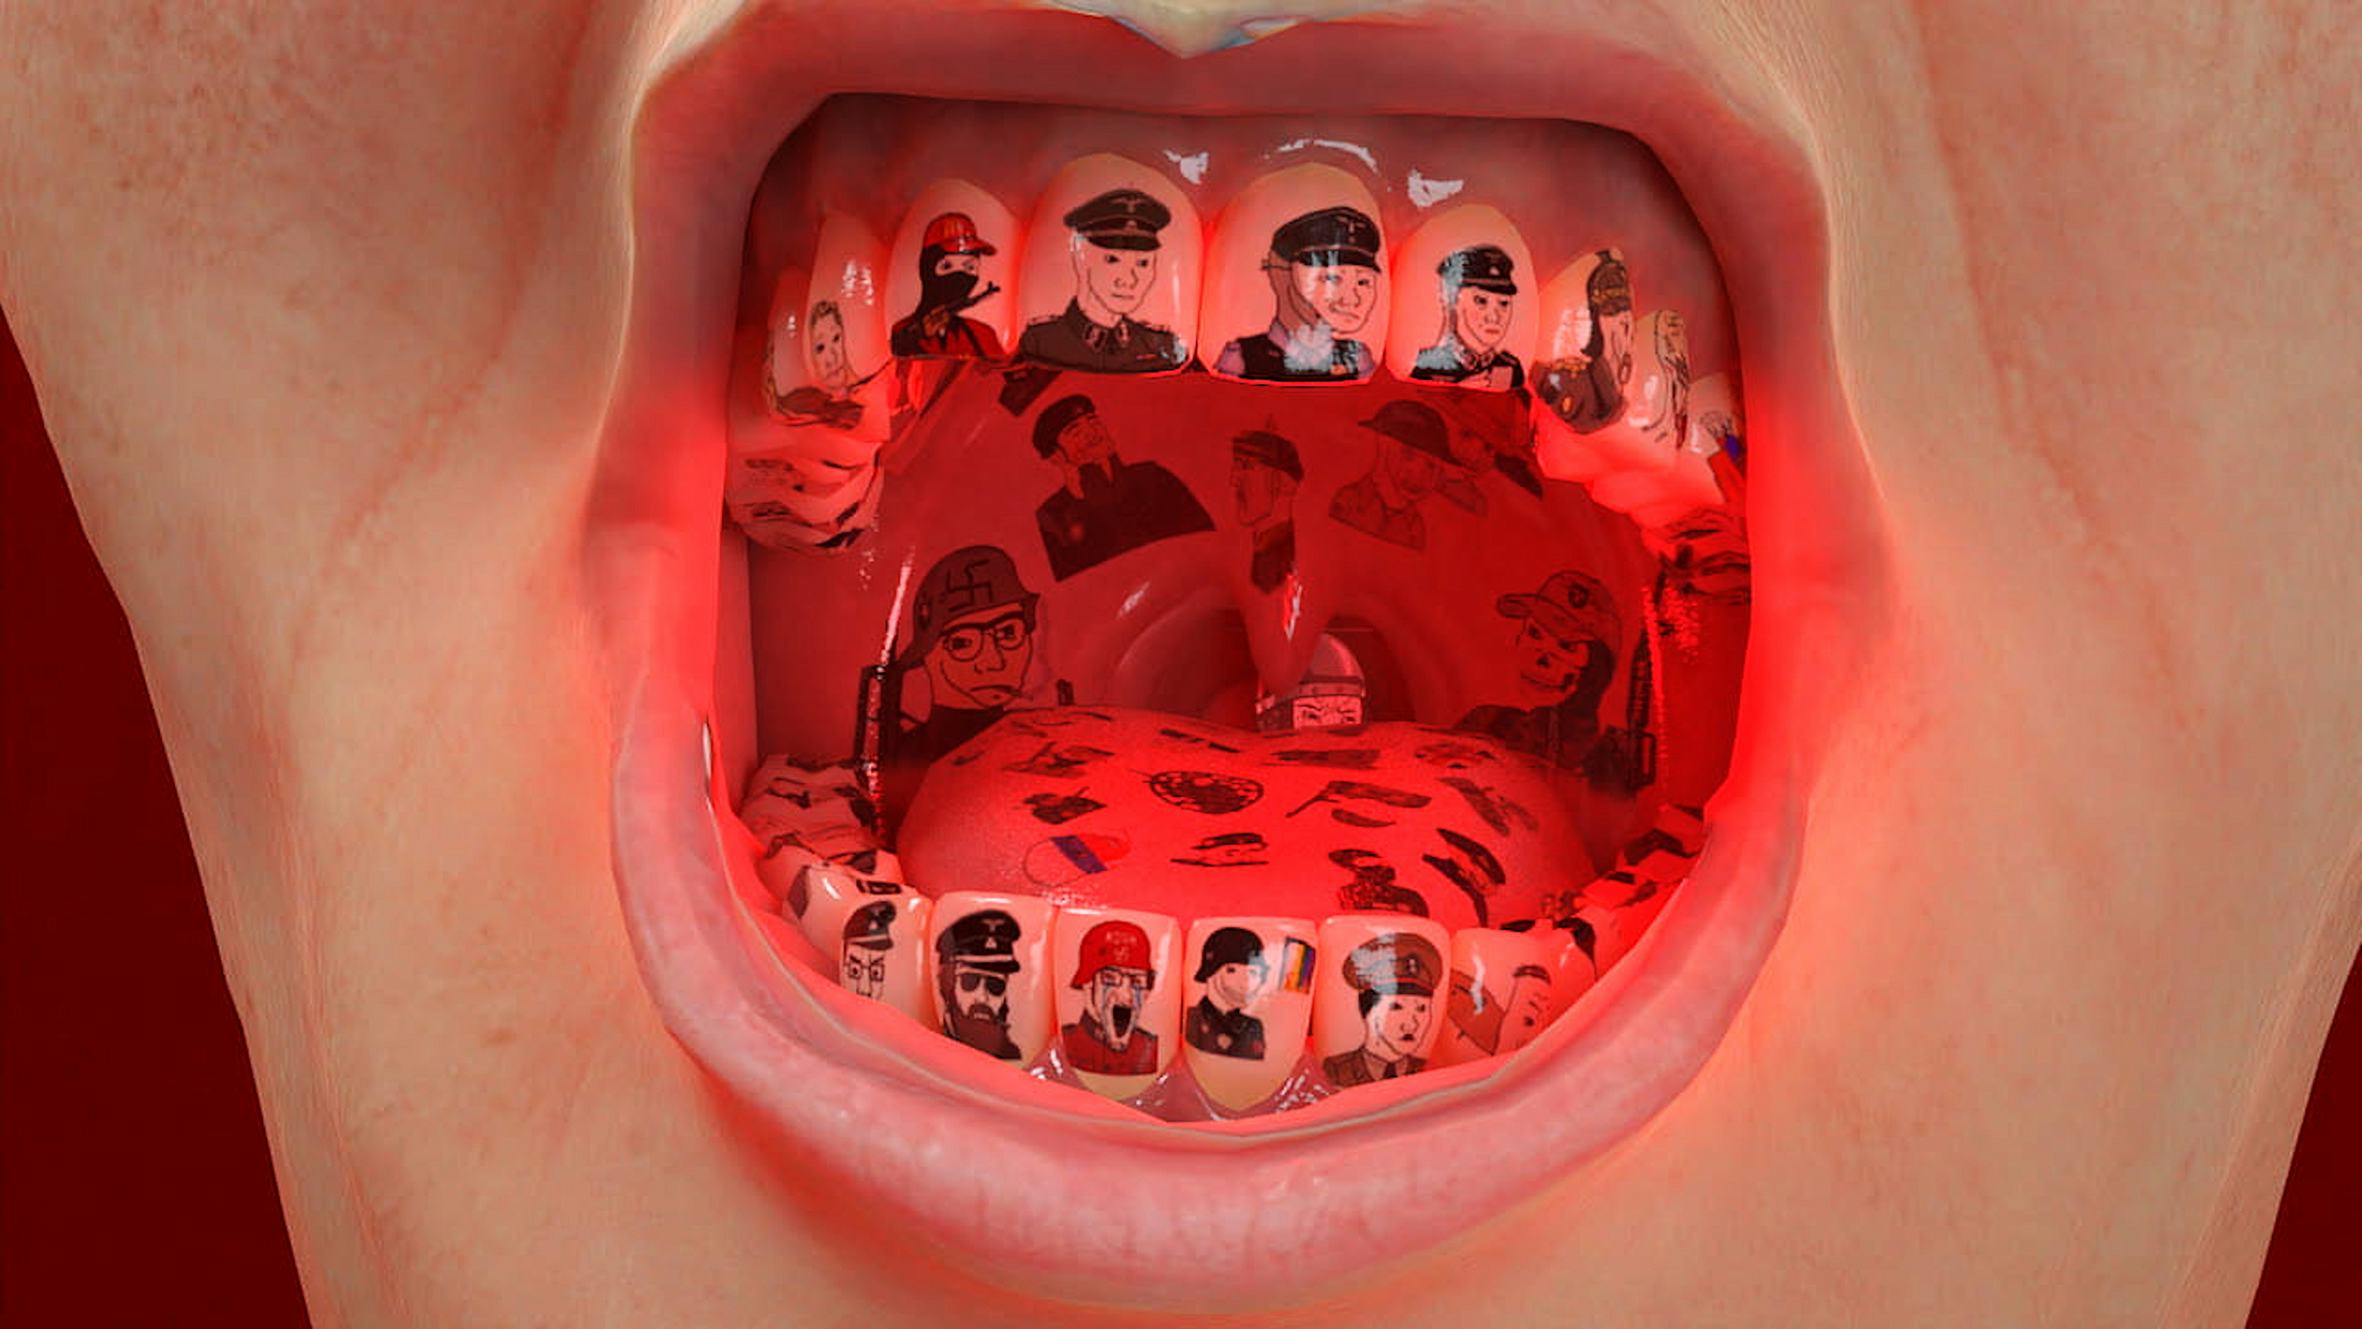 Computerized mouth with memes on teeth